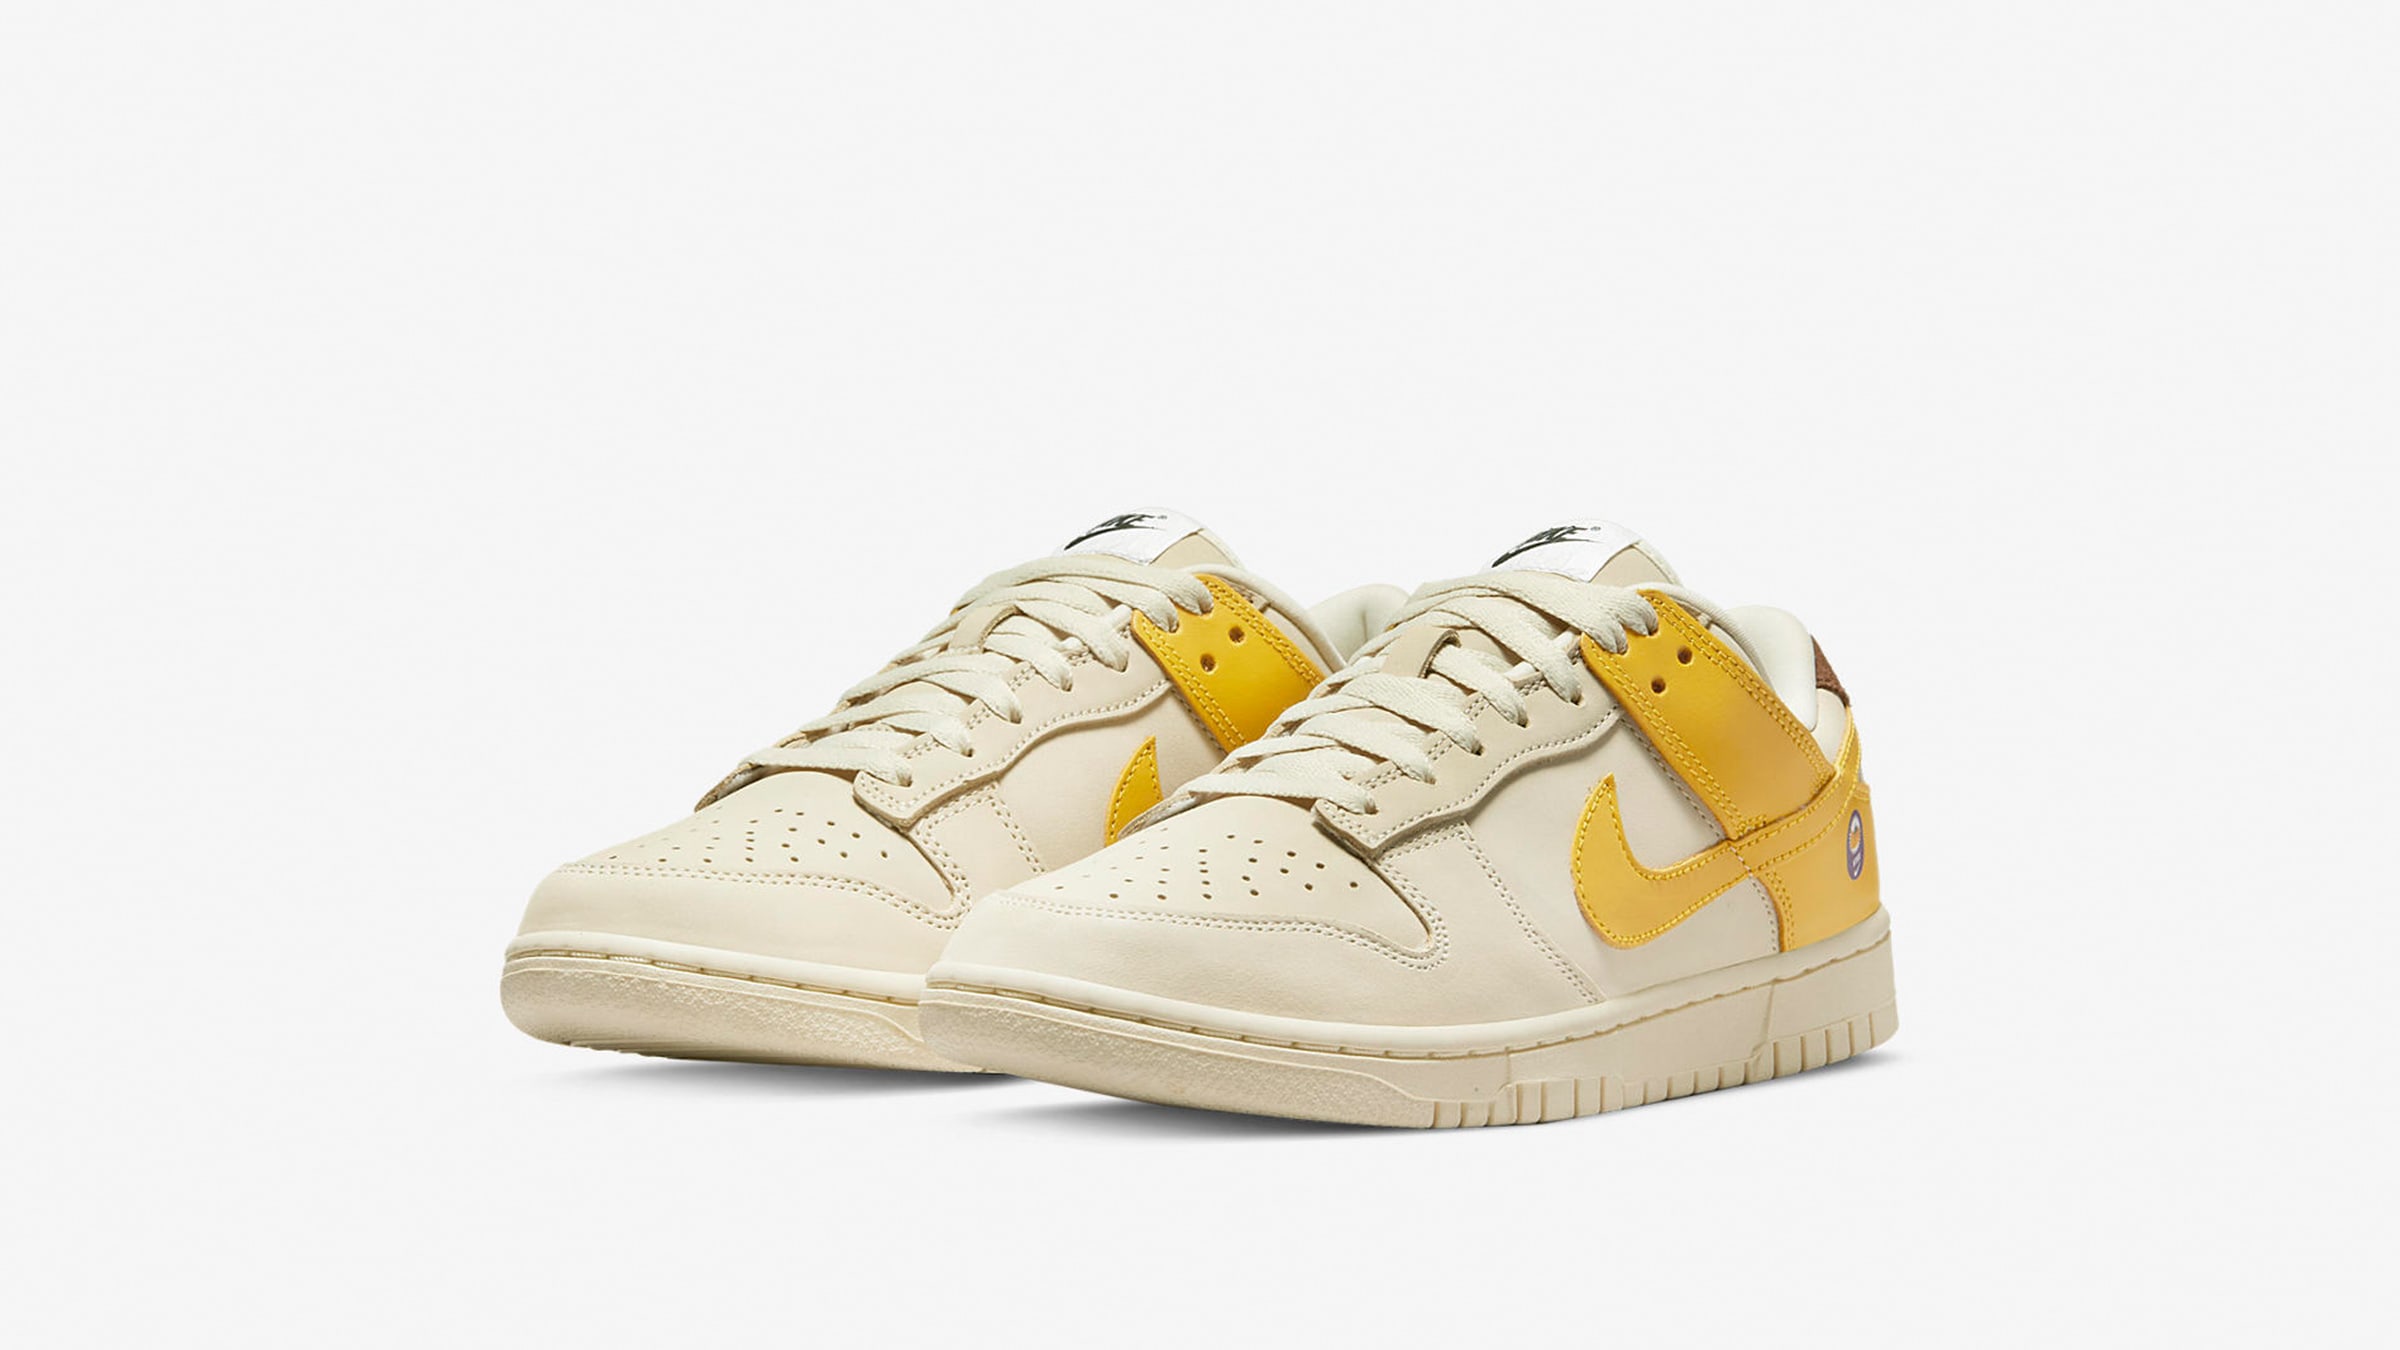 Nike Dunk Low 'Banana' W (Coconut Milk & Sulfur) | END. Launches